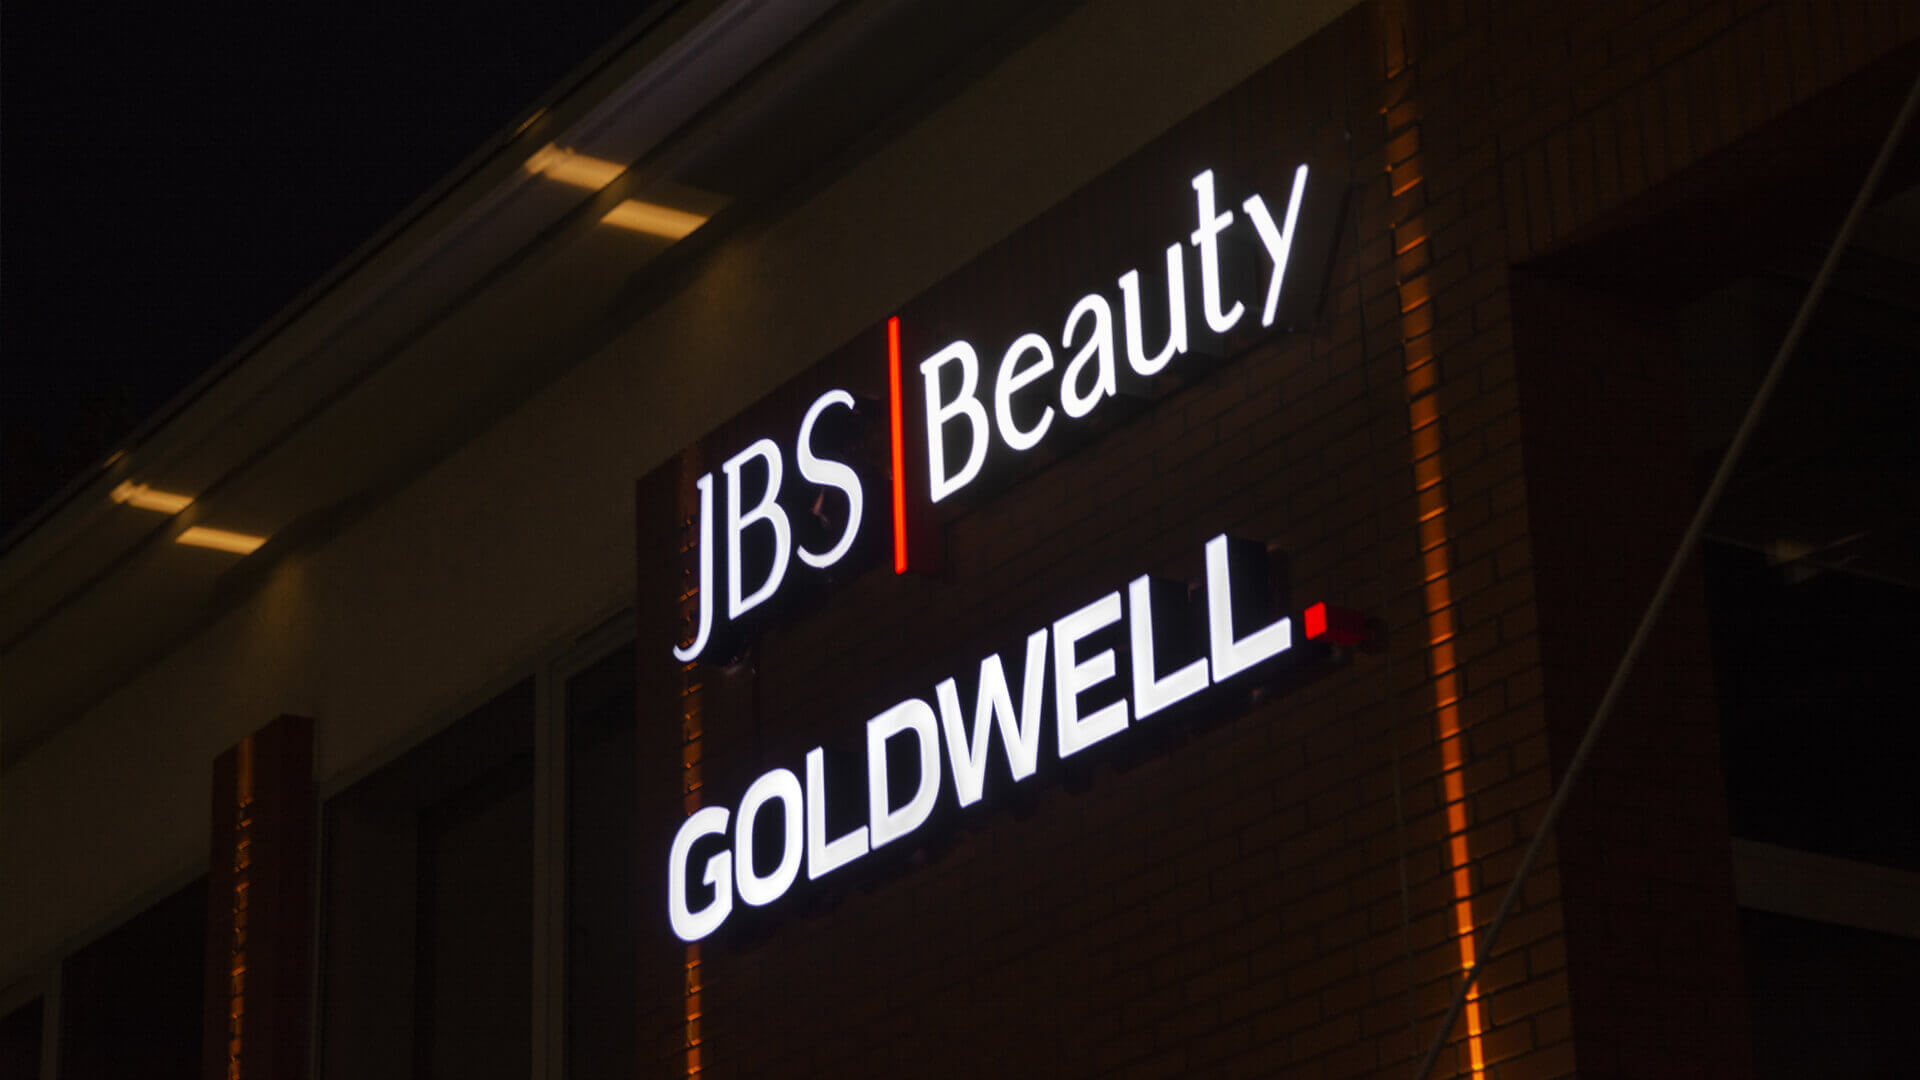 Goldwell  - jbs-goldwell-bauty-letter-colour-illuminated-led-letter-signs-on-the-wall-of-the-building-letter-signs-on-the-height-of-the-beglach-letter-signs-on-the-office building-gdansk-letnica (11) 